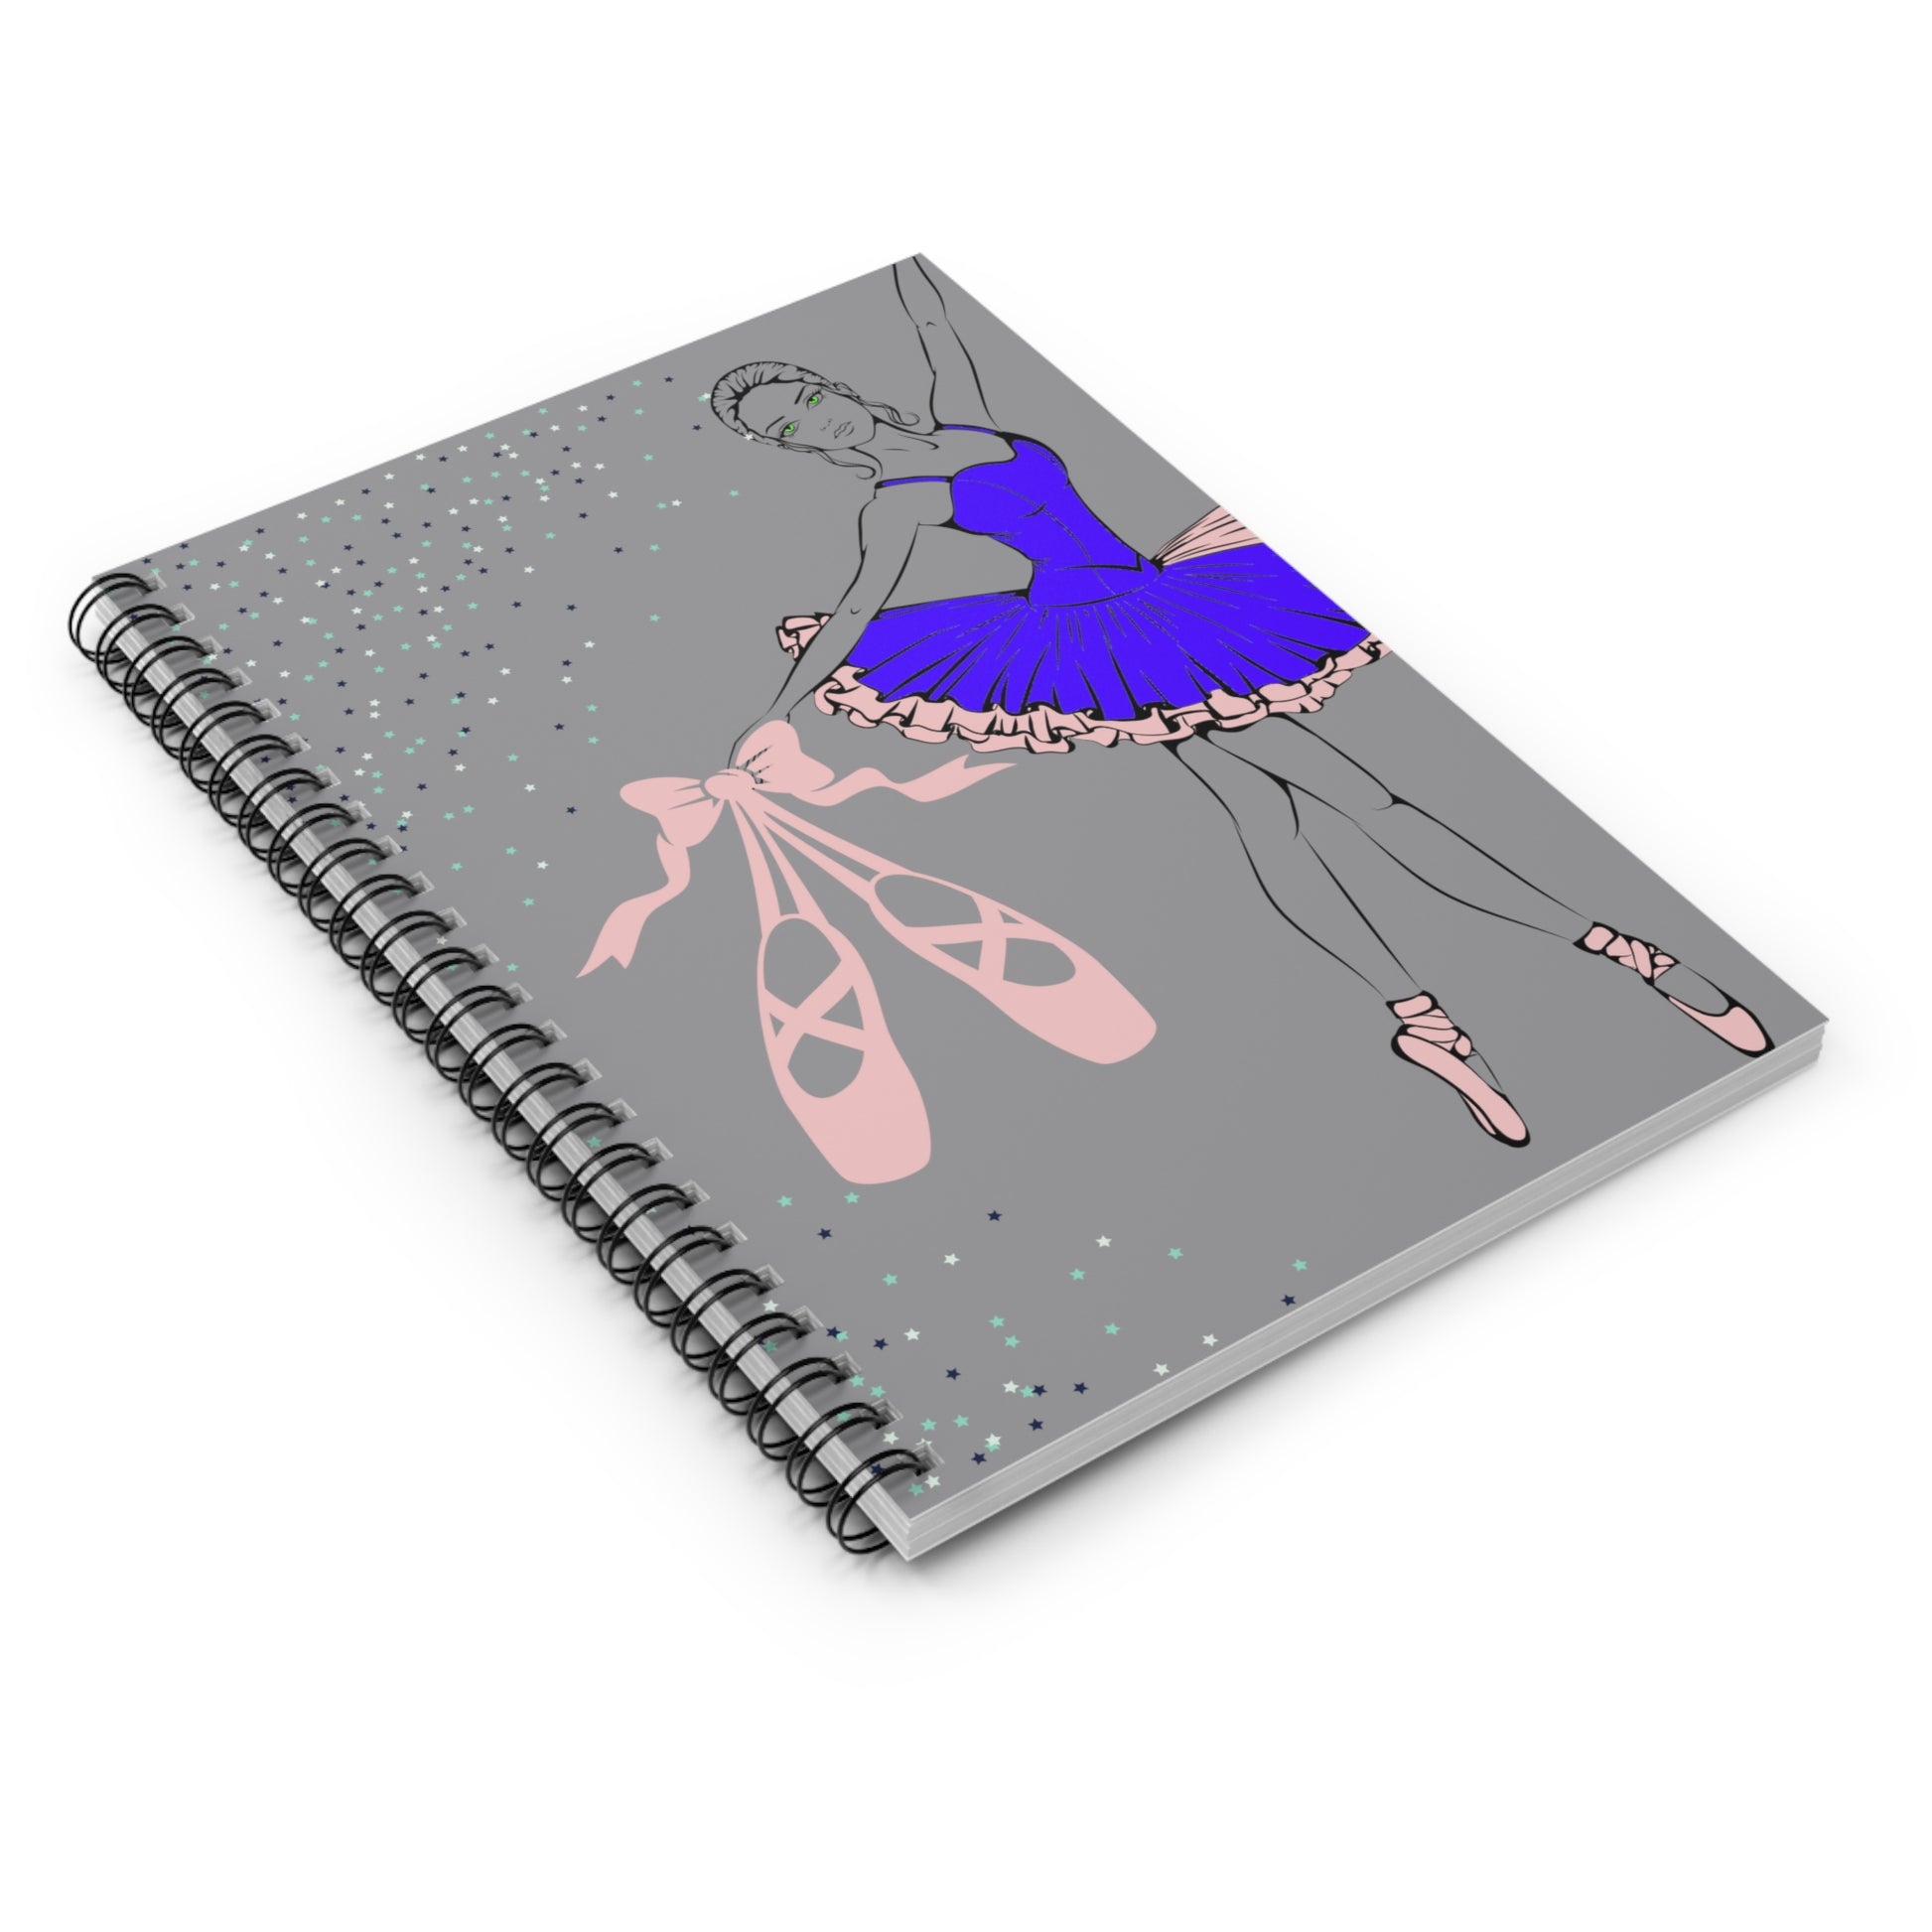 Dance Among the Stars: Spiral Notebook - Log Books - Journals - Diaries - and More Custom Printed by TheGlassyLass